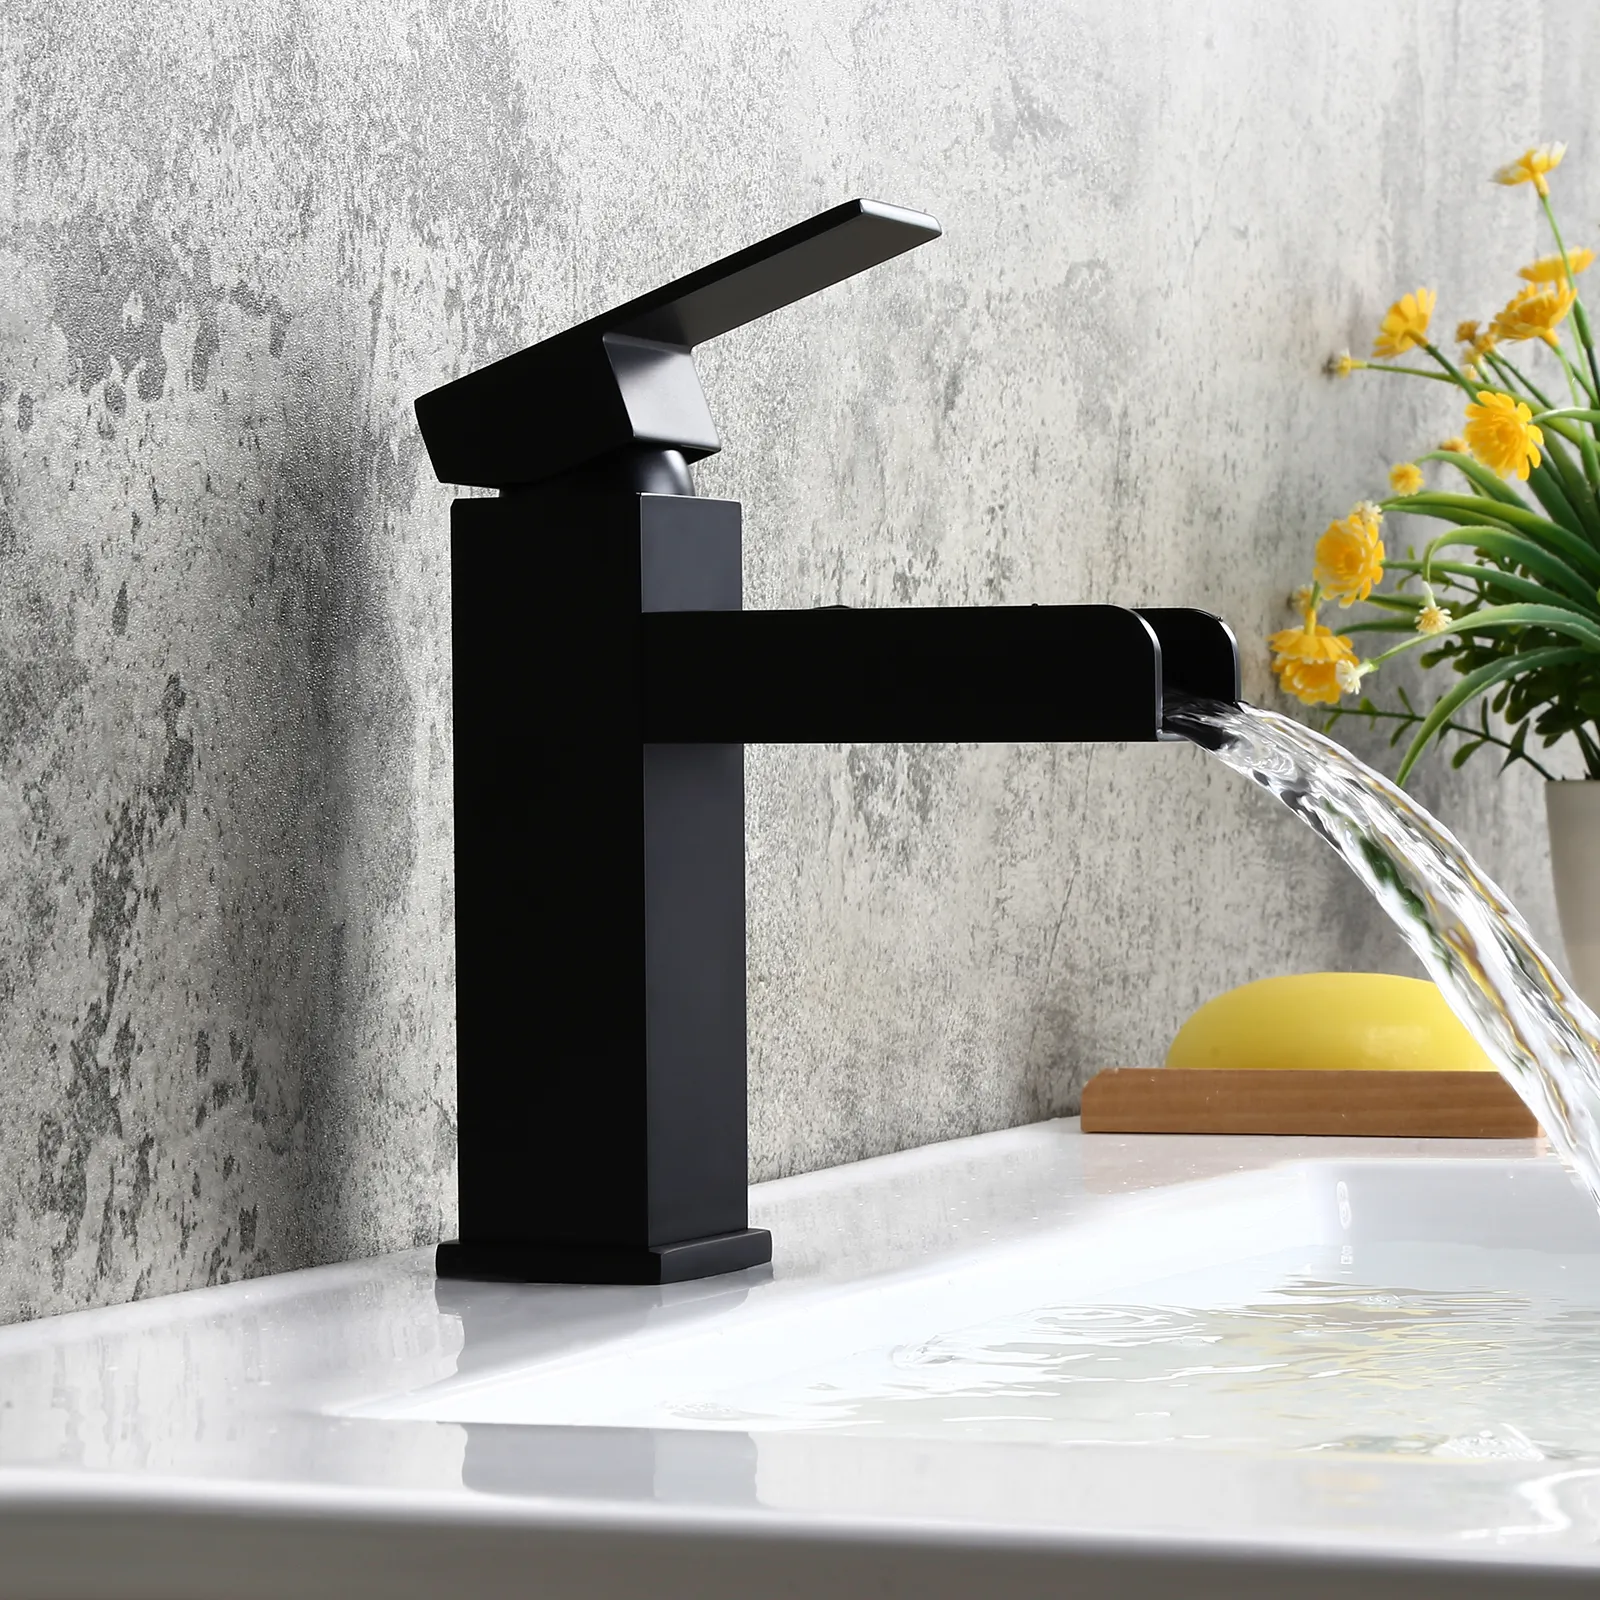 Homary Contemporary Matte Black Waterfall Bathroom Vanity Sink Faucet Lead Free Solid Brass Single Handle One Hole Deck-Mount Lavatory Sink Faucet Pop Up Drain Included cUPC Listed